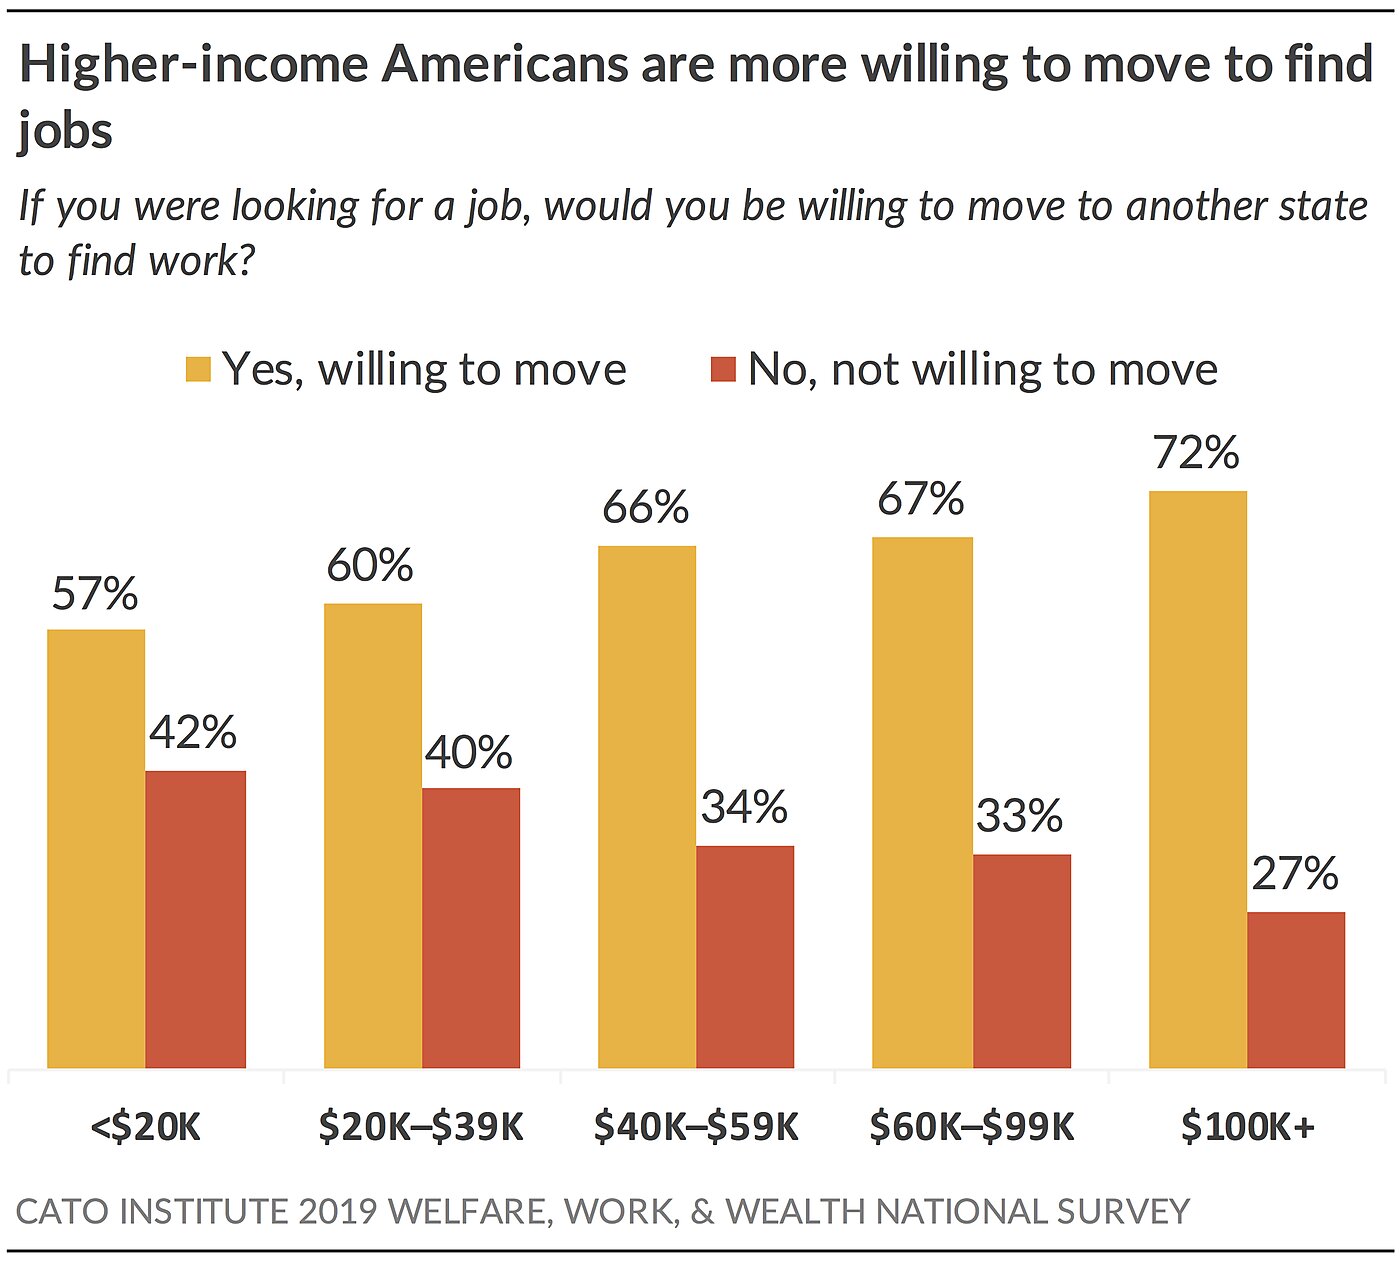 Higher-income Americans are more willing to move